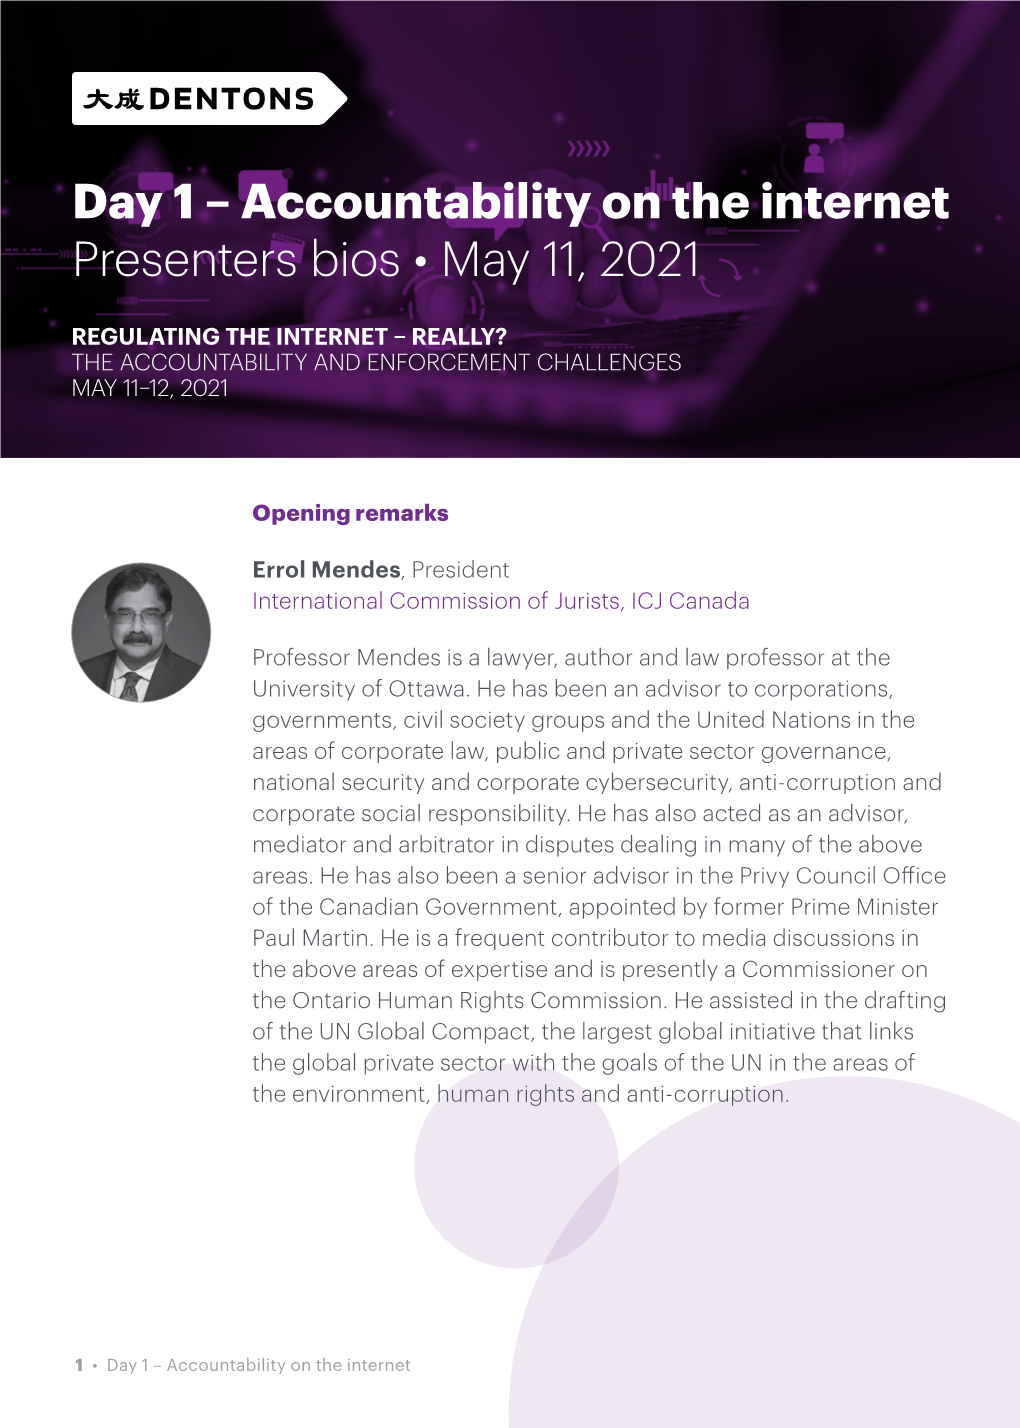 Accountability on the Internet Presenters Bios • May 11, 2021